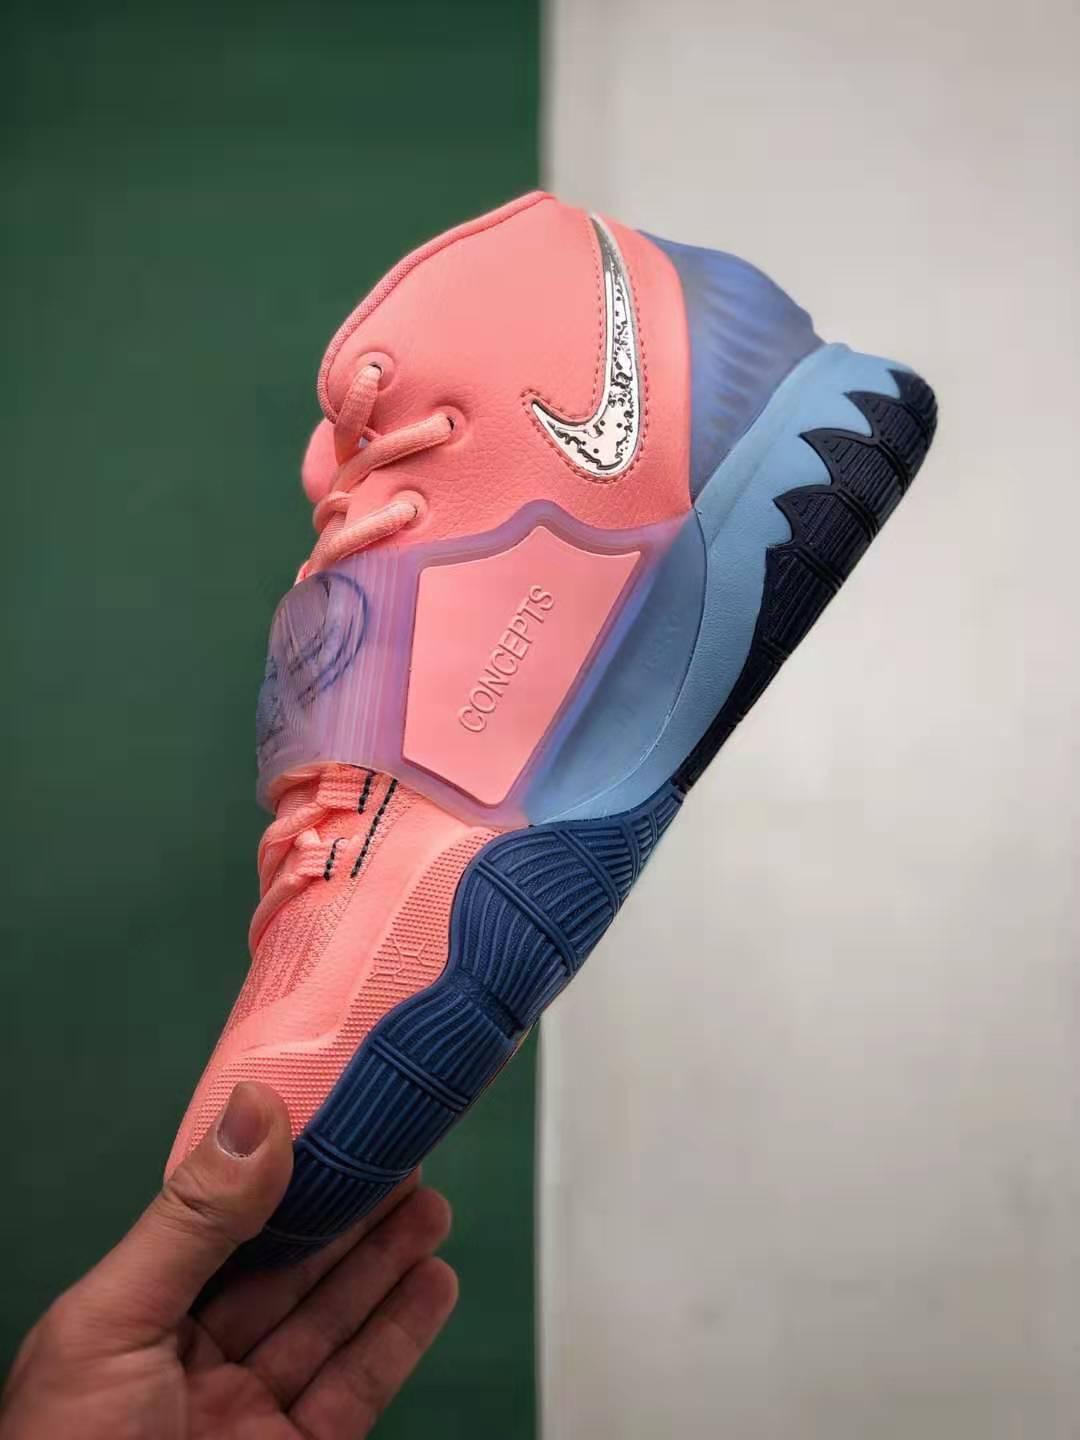 Concepts x Nike Kyrie 6 Khepri Pink Tint Guava Ice CU8879-600 - Unique Collaboration For Basketball Enthusiasts